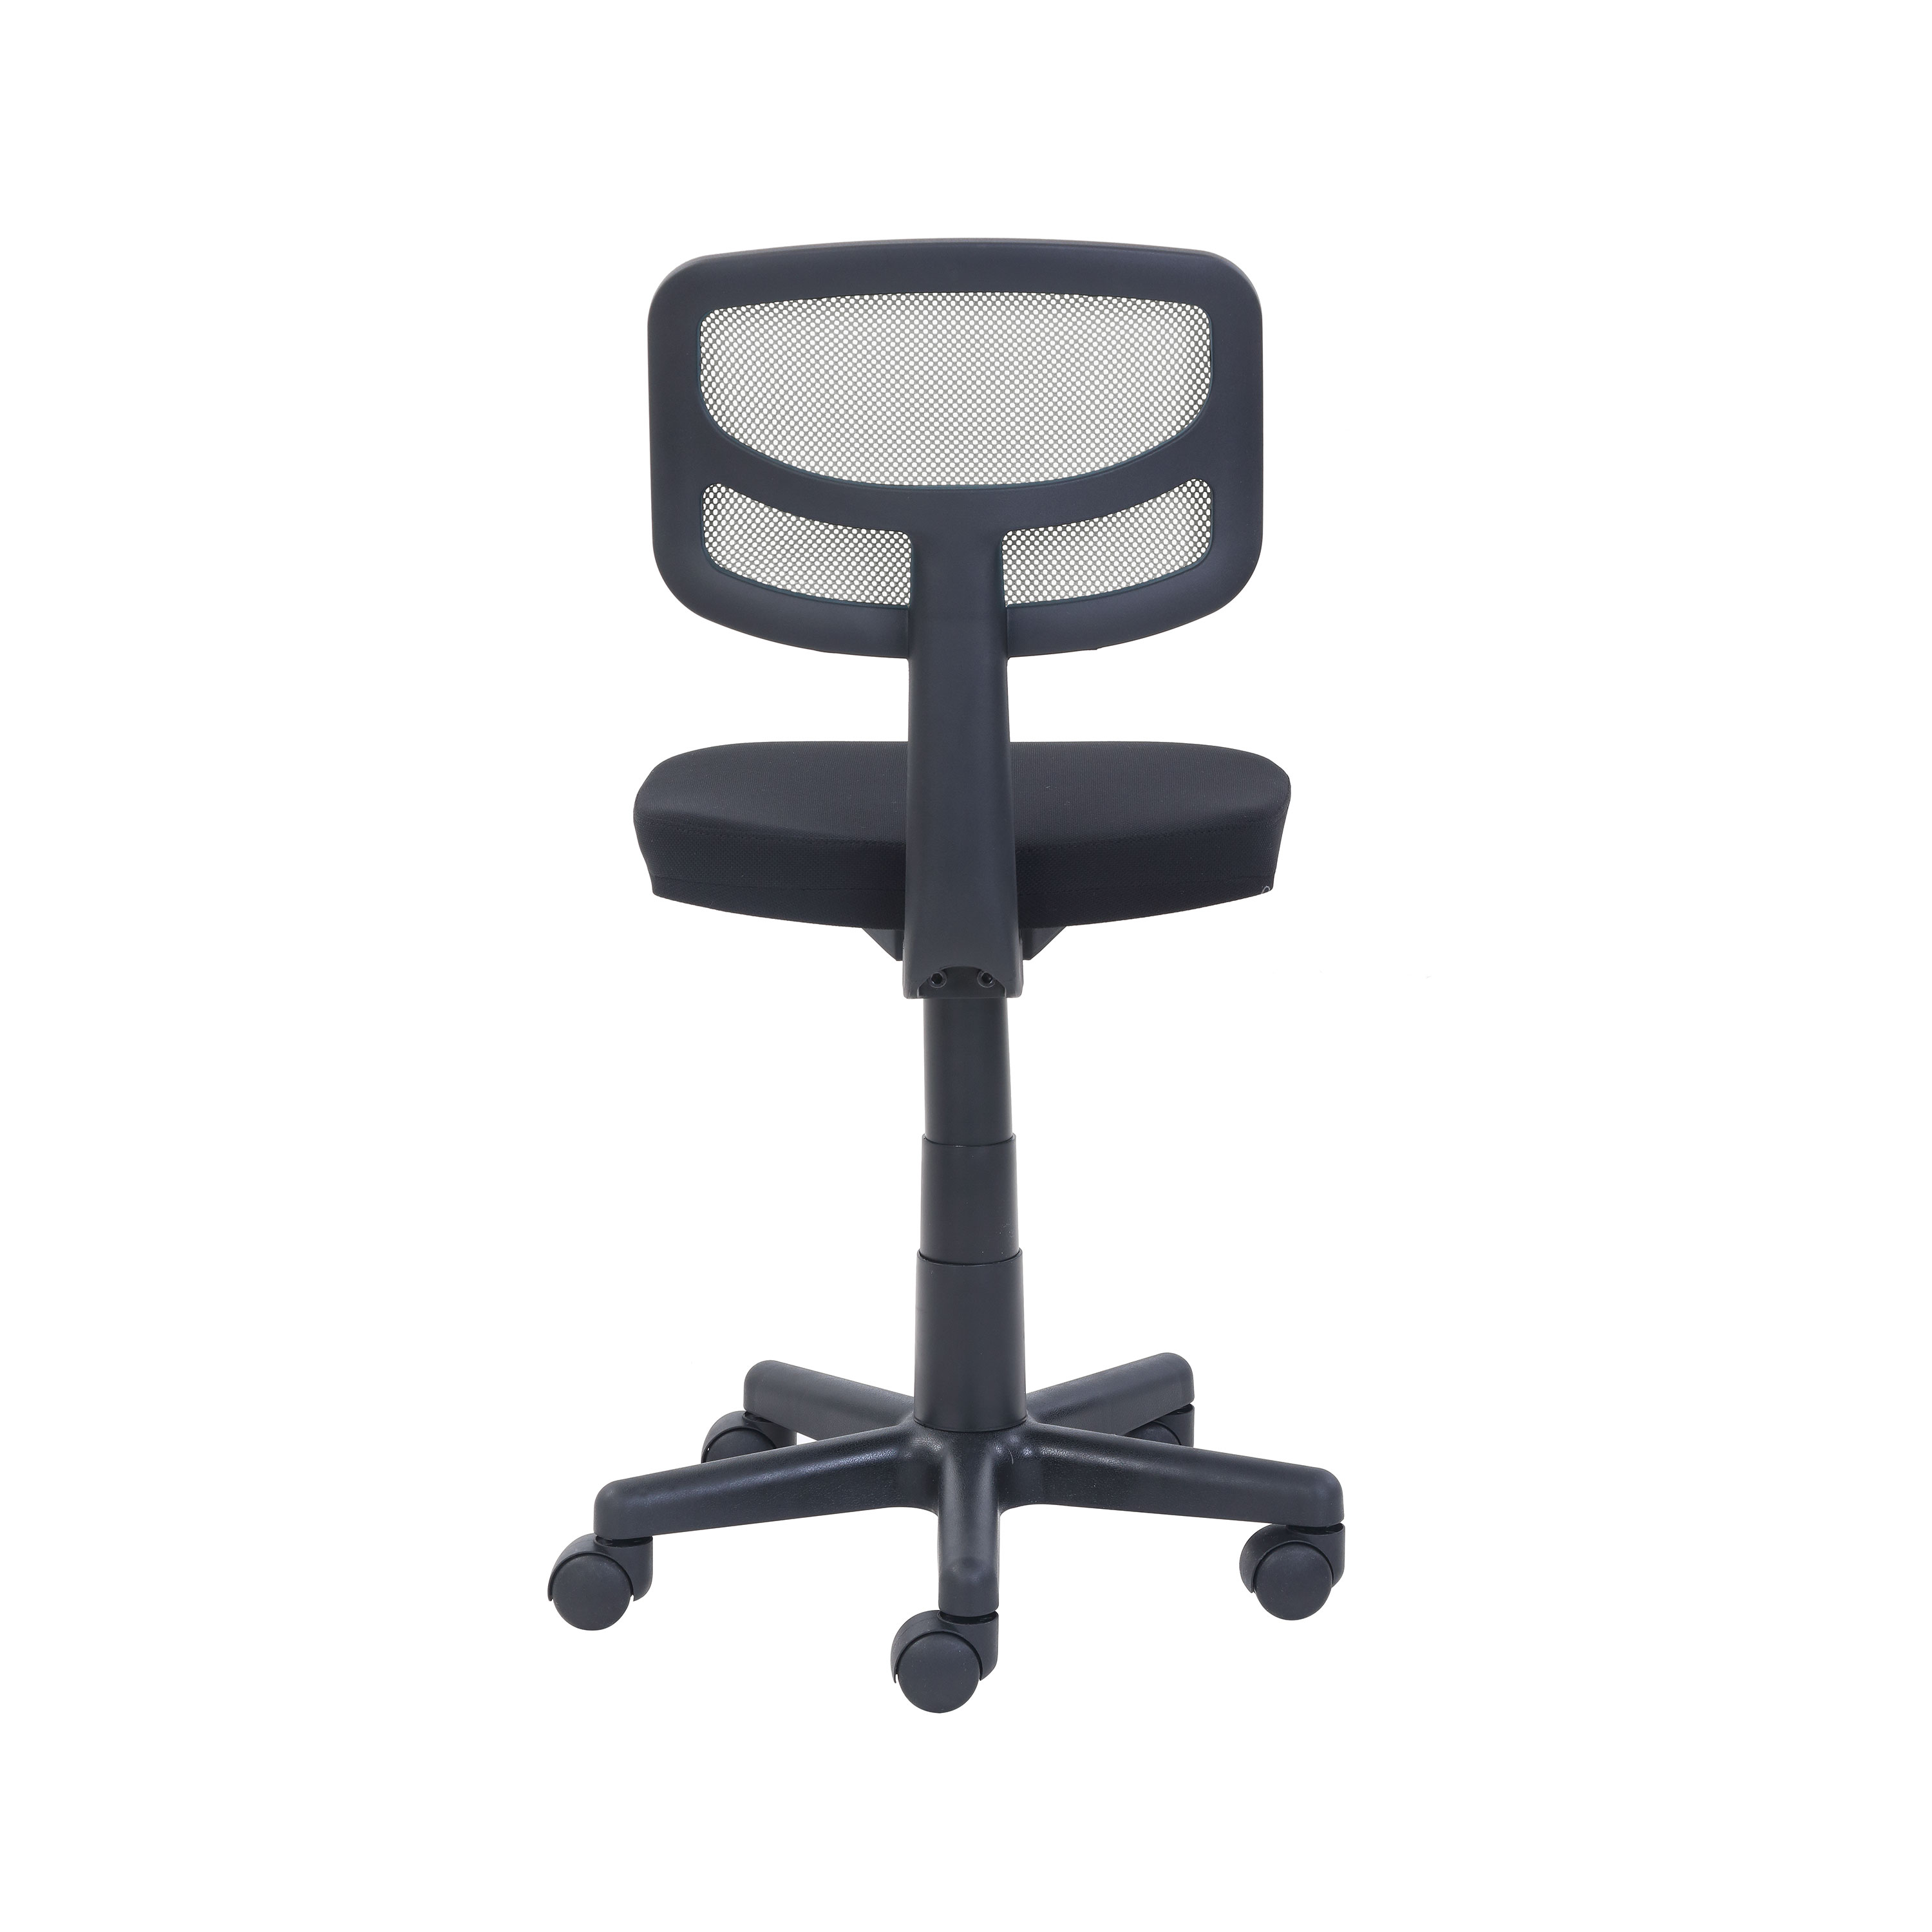 Mainstays Mesh Task Chair with Plush Padded Seat, Gray - image 3 of 9